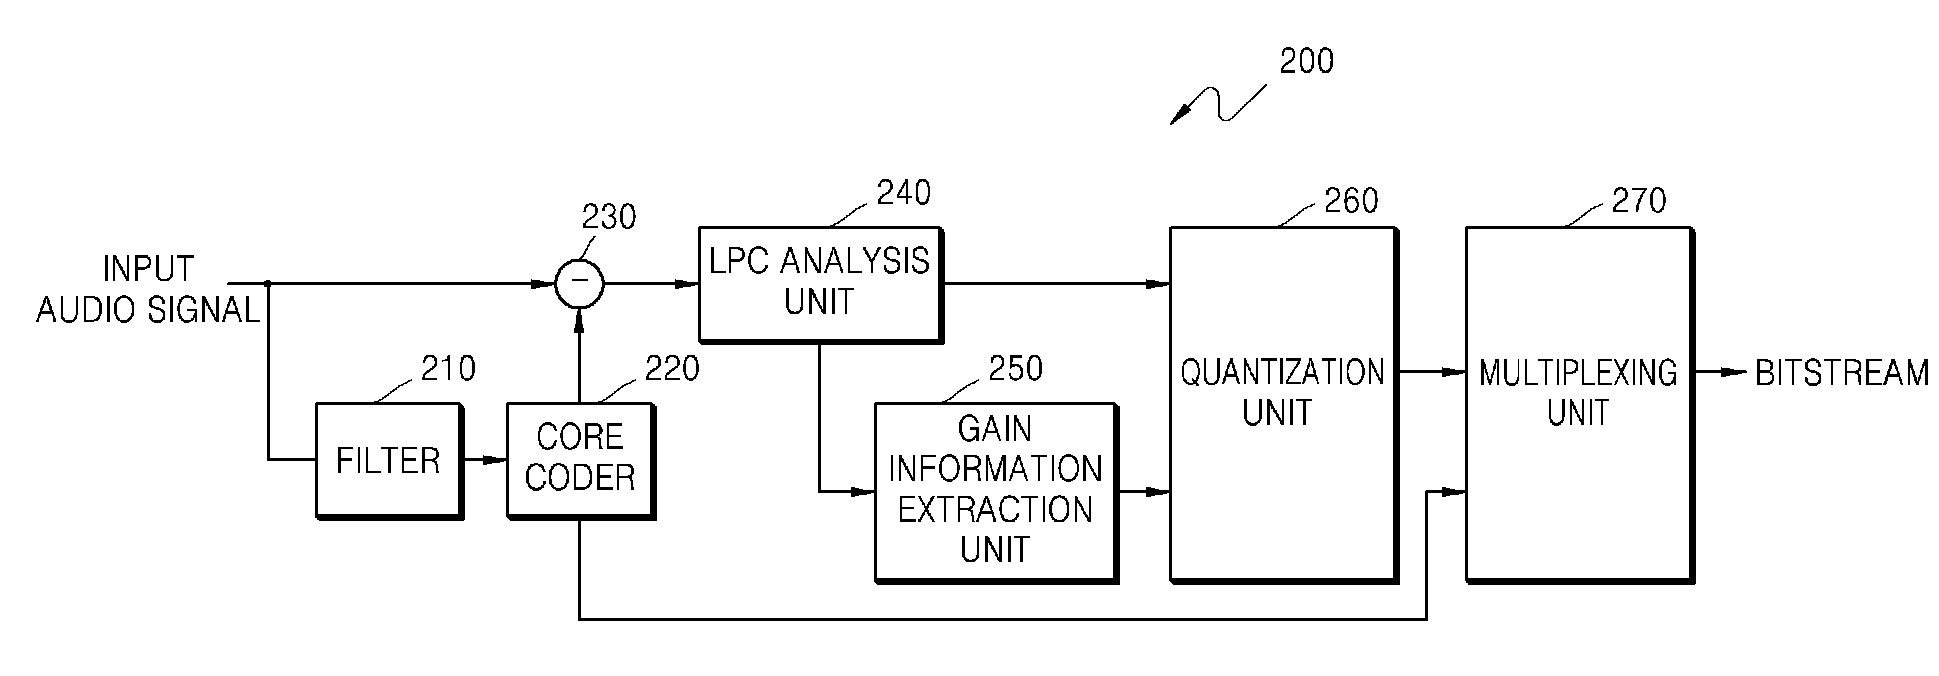 Methods and apparatuses for encoding and decoding audio signal